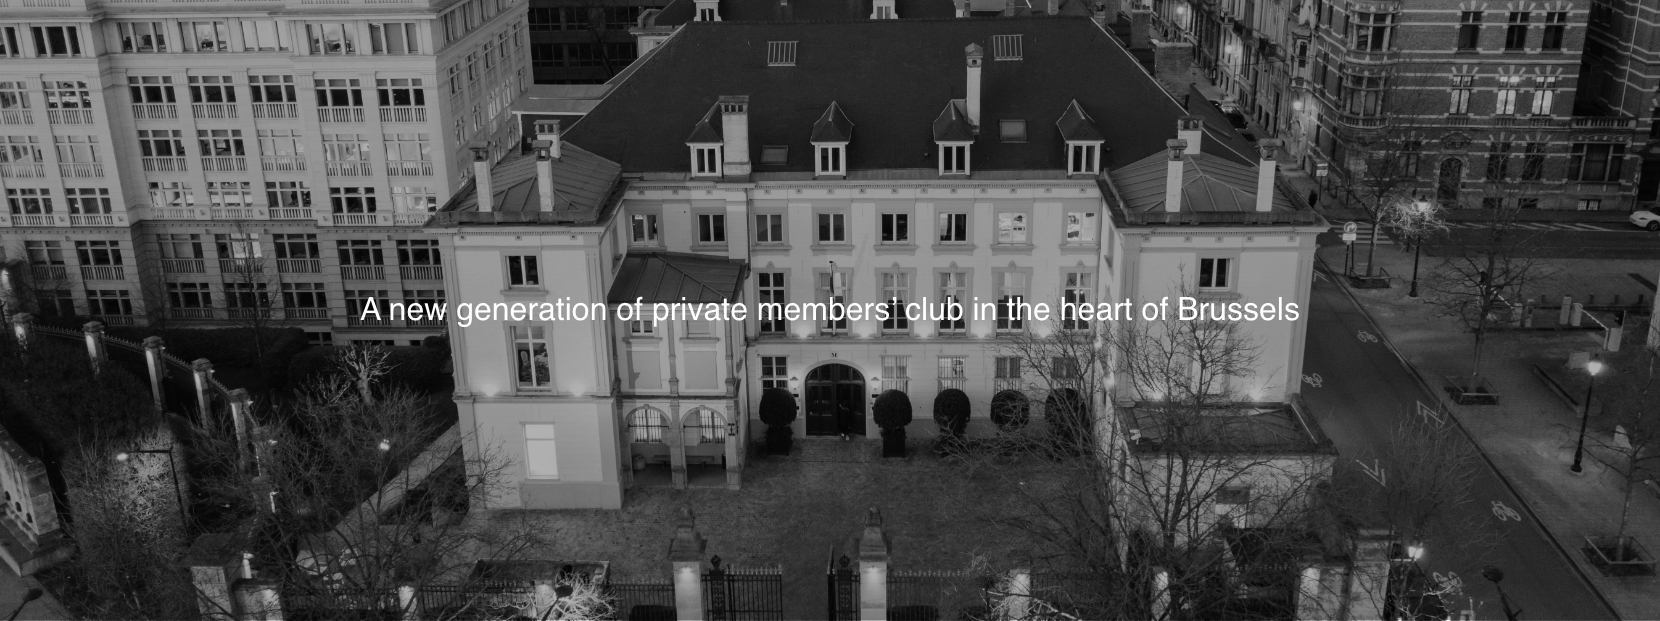 Full Circle members club and event space in Brussels